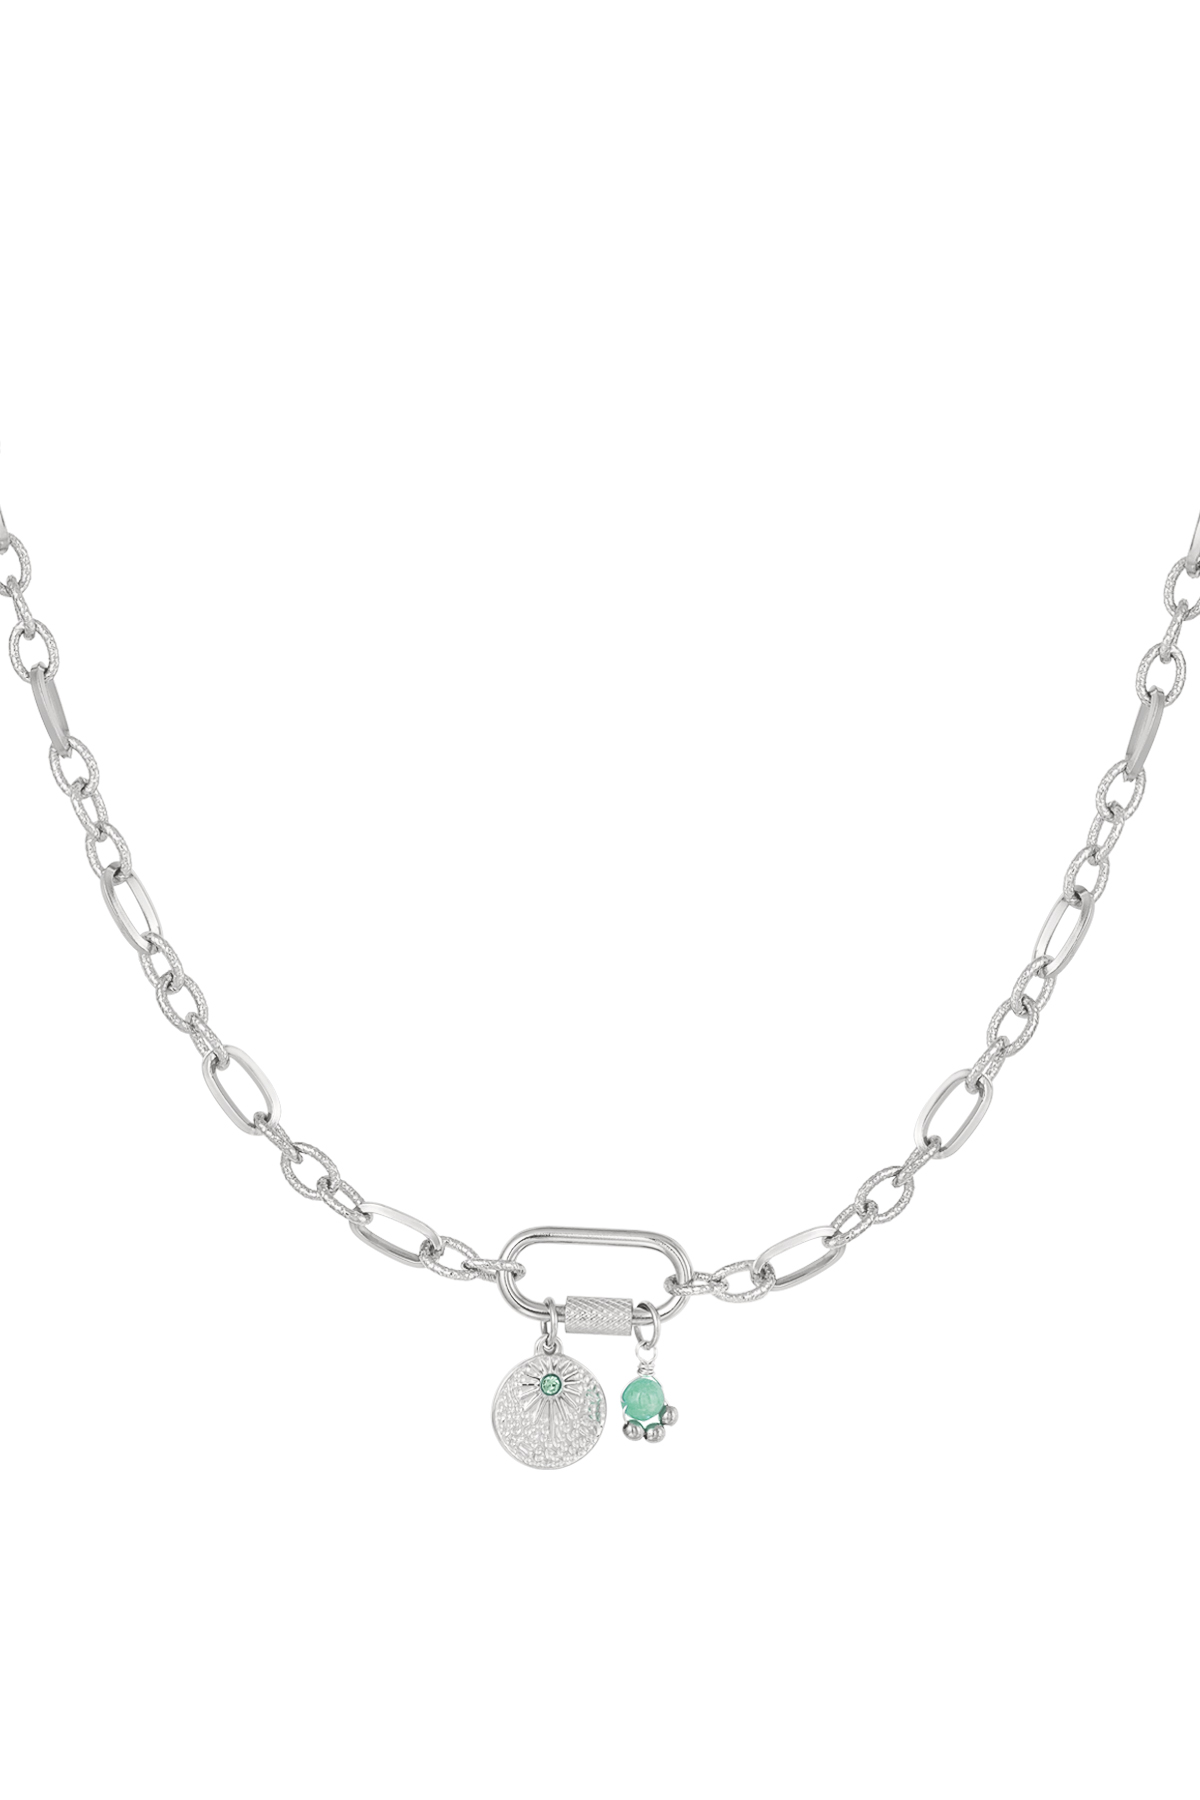 Link chain with charms - green &amp; silver Stainless Steel